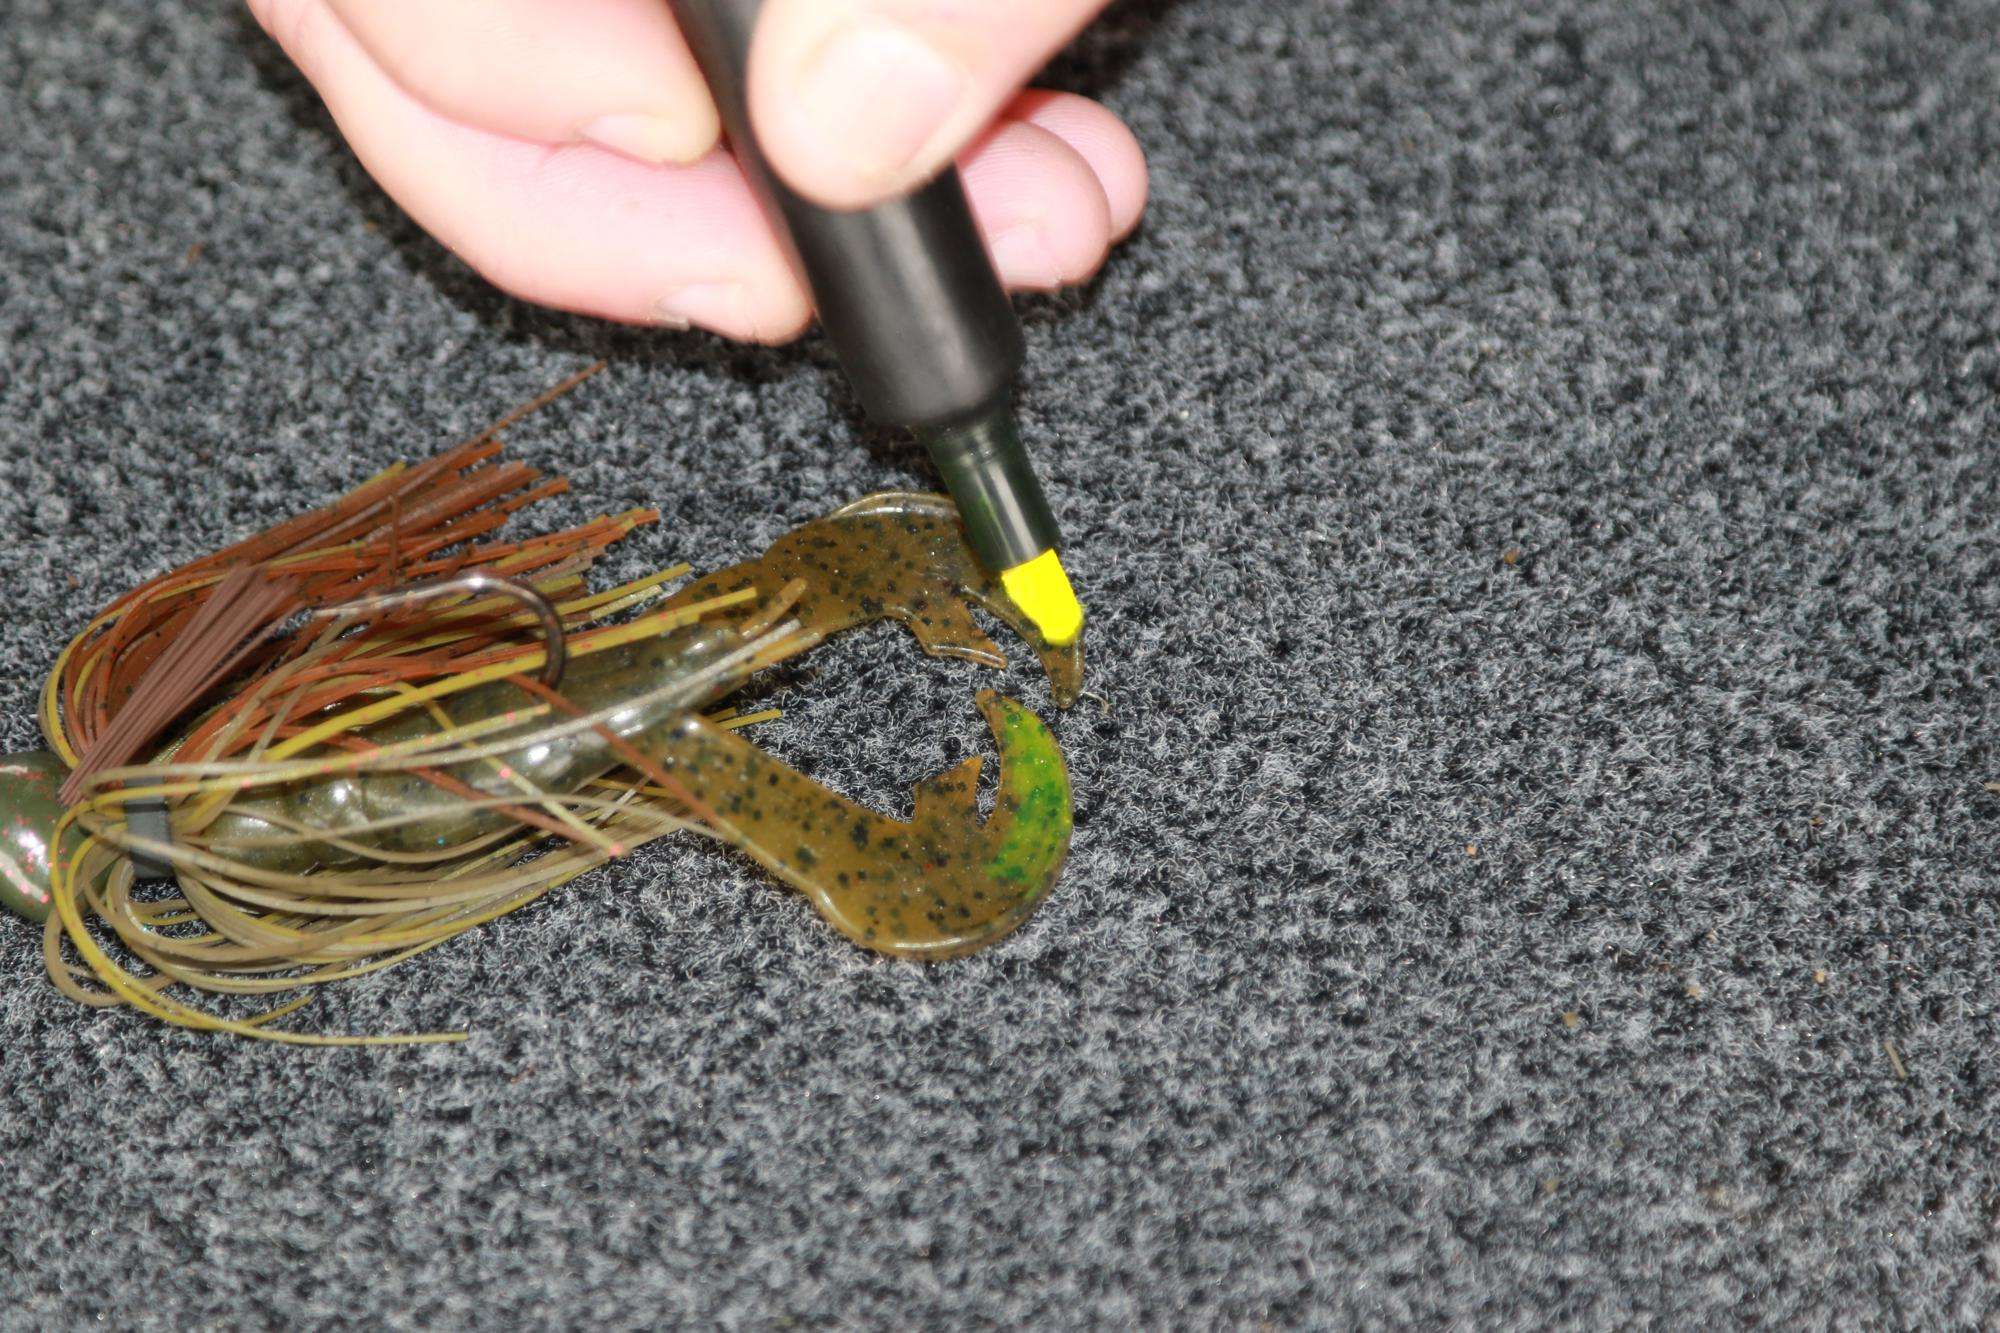 When he thinks the fish need a little visual nudging, he will dye the tips of his trailer chartreuse. Dye pens, he said, are quicker and neater than dipping dyes.